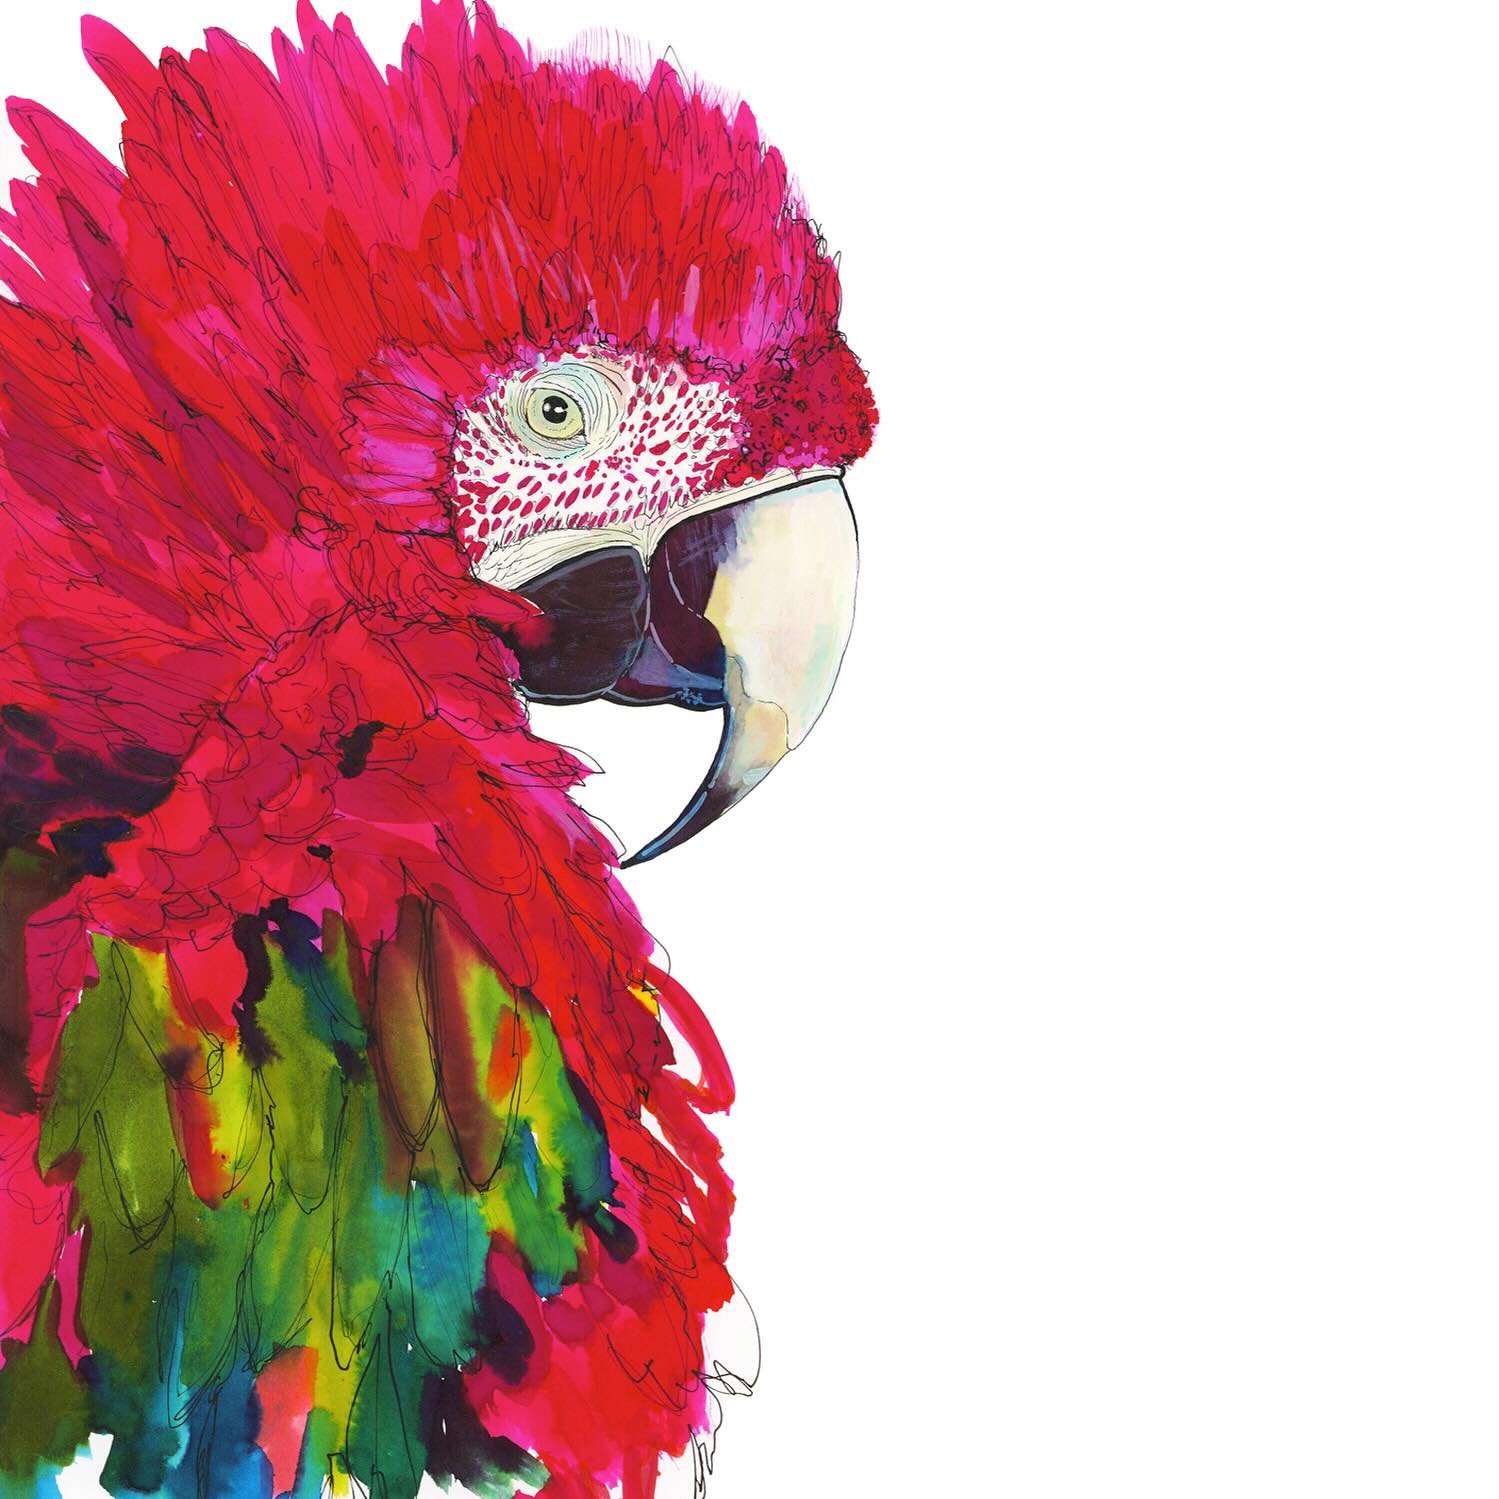 SCARLET MACAW

Macaws are the largest parrots in the world &mdash; the body of the scarlet macaw from beak to tail can be as long as 83cm.

This beautiful parrot has a creamy white, almost featherless face, with bright red plumage covering most of it